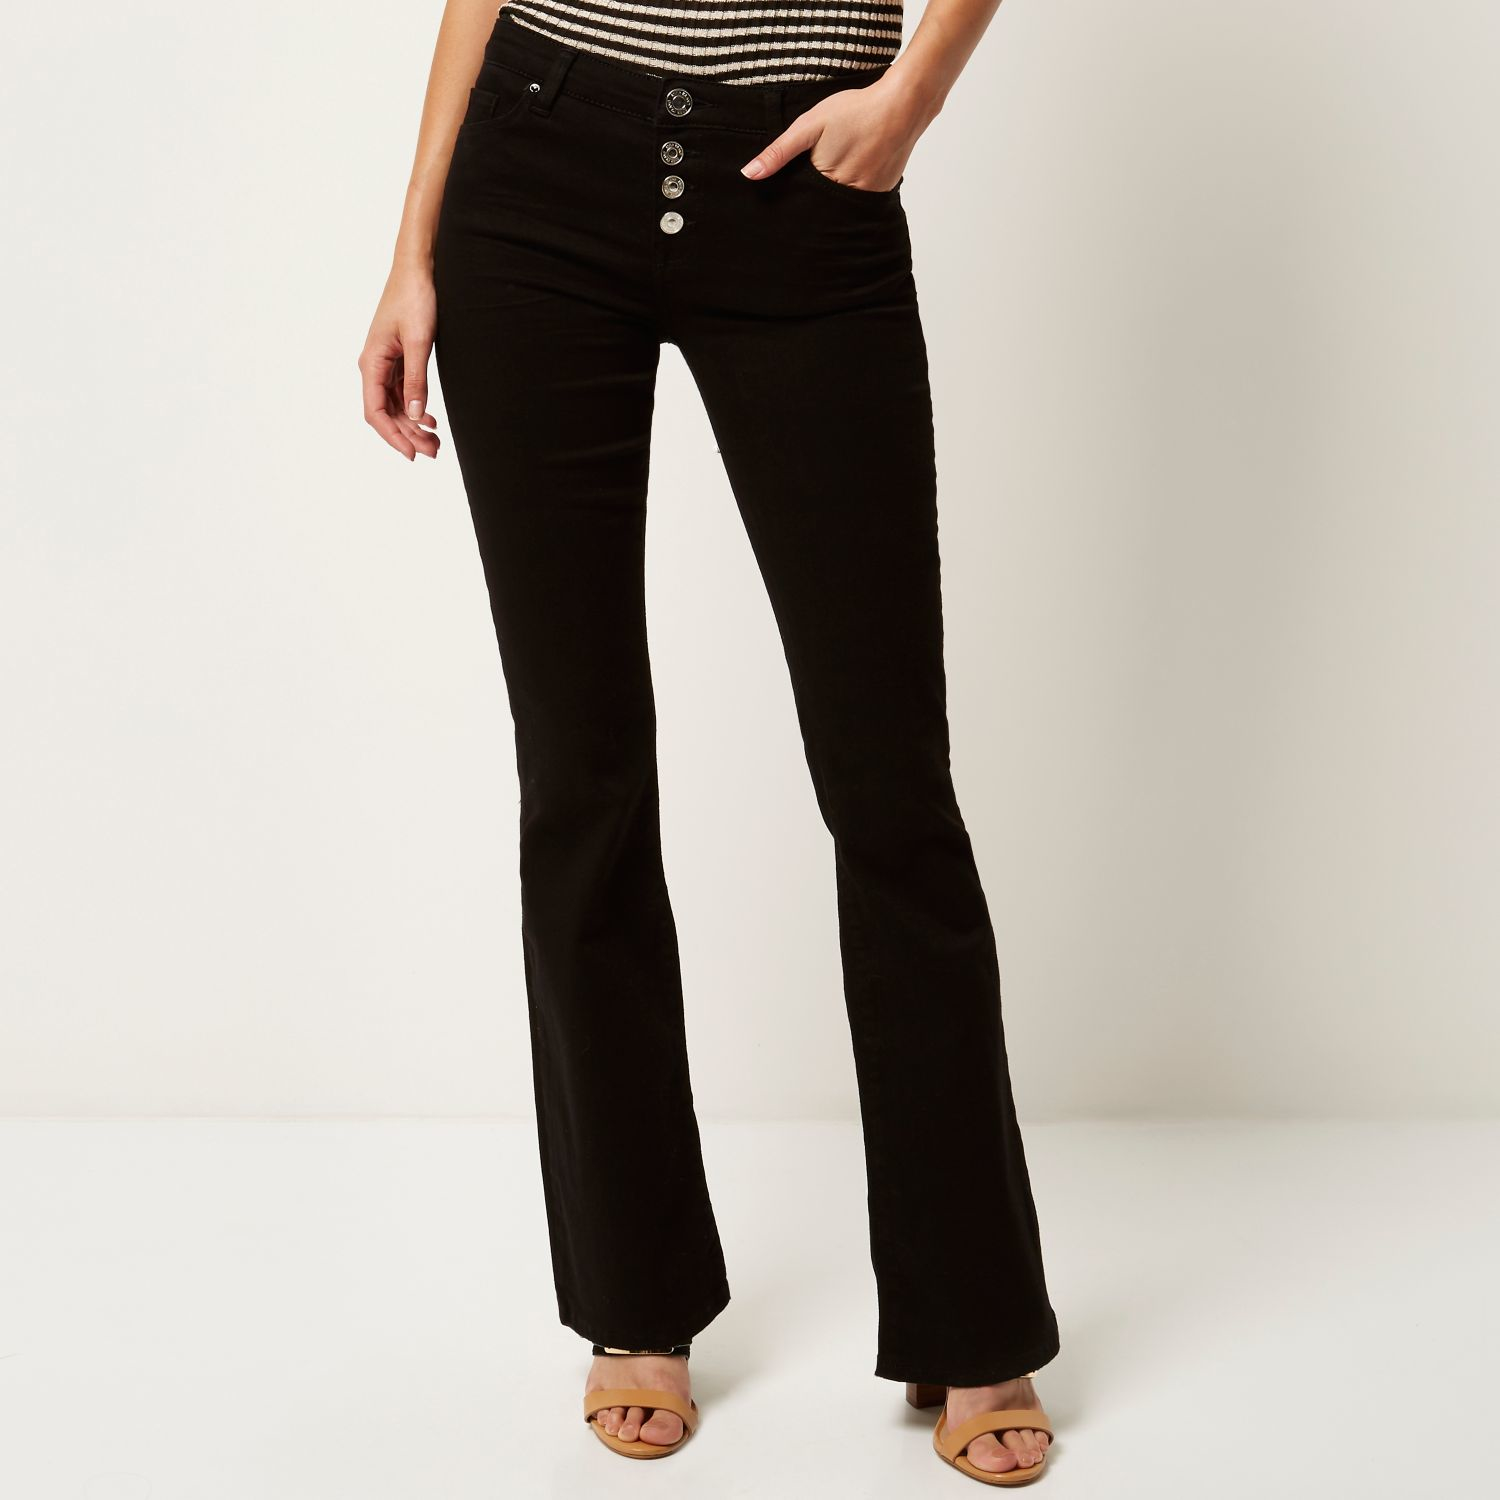 Lyst - River Island Black Button Up Brooke Flare Jeans in Black